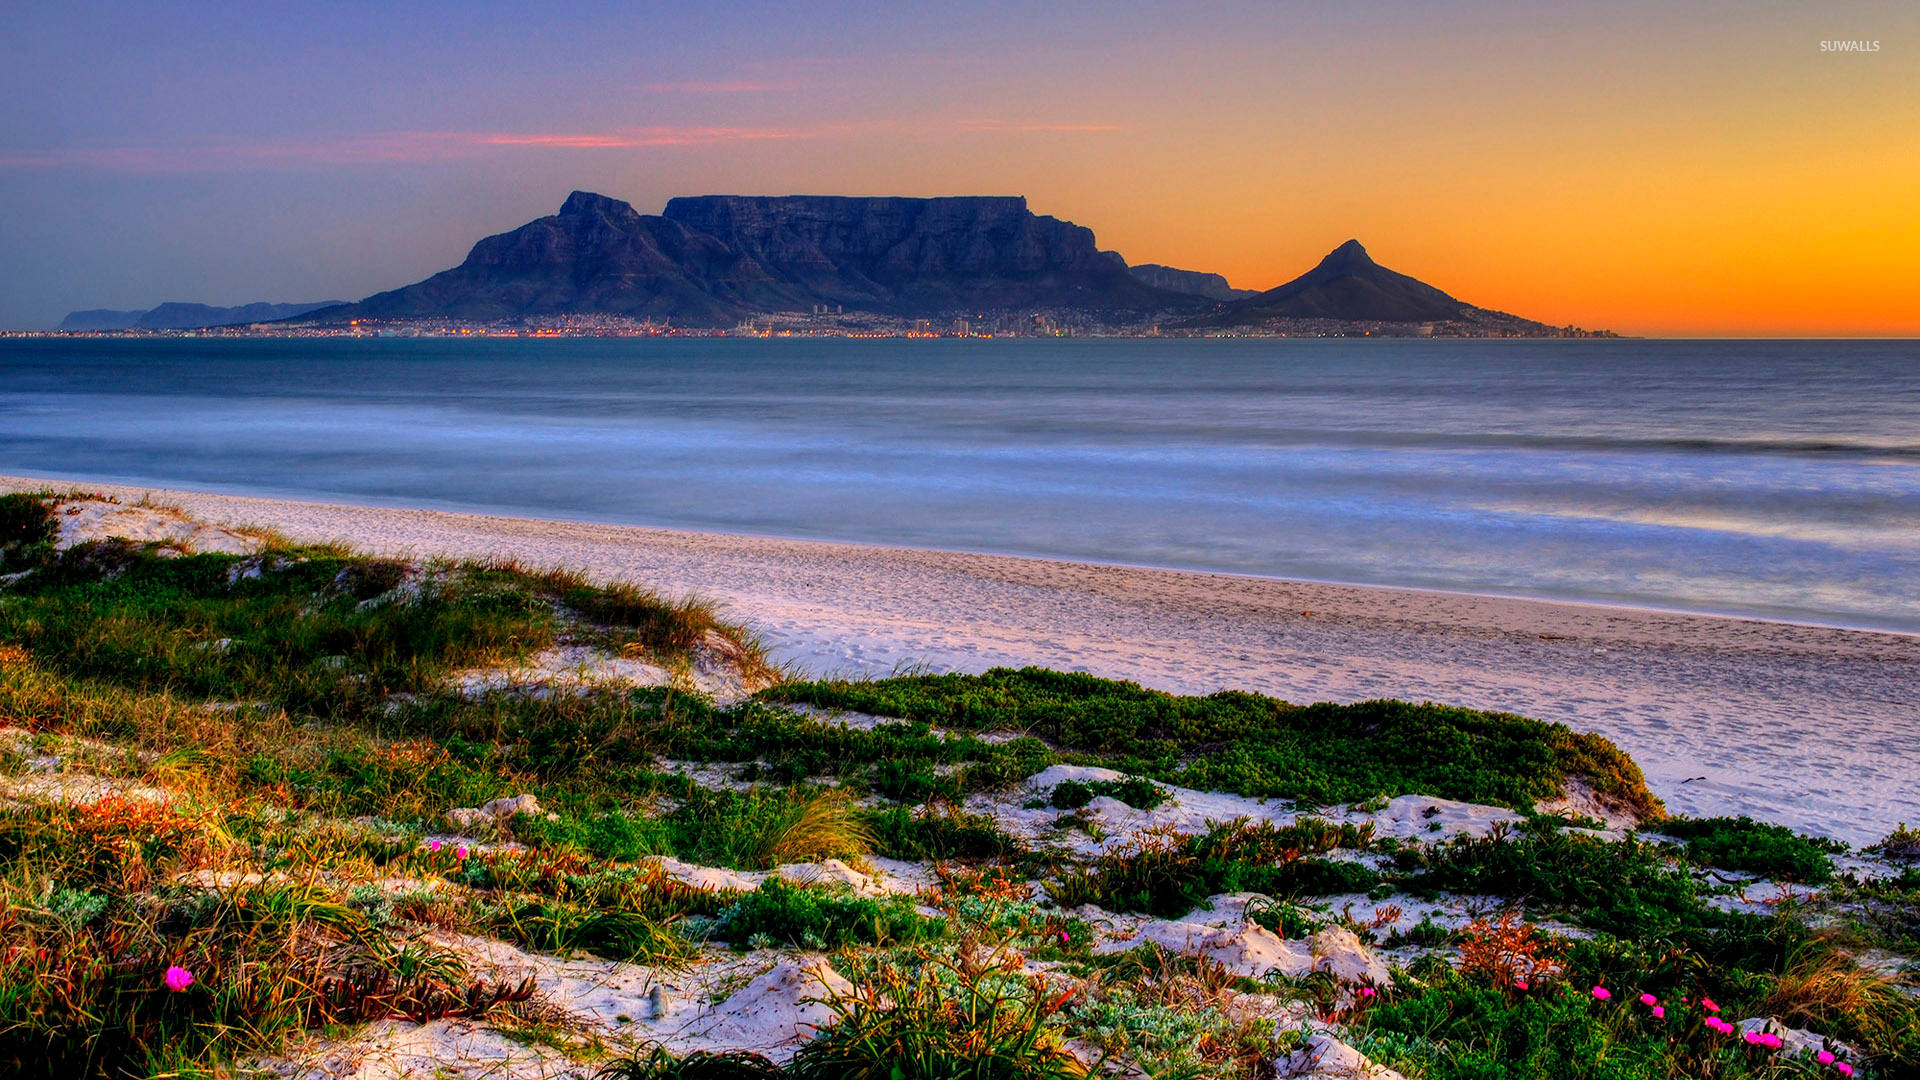 Wallpaper ID 460561  Man Made Cape Town Phone Wallpaper Coast South  Africa Cityscape Sky Mountain 720x1280 free download